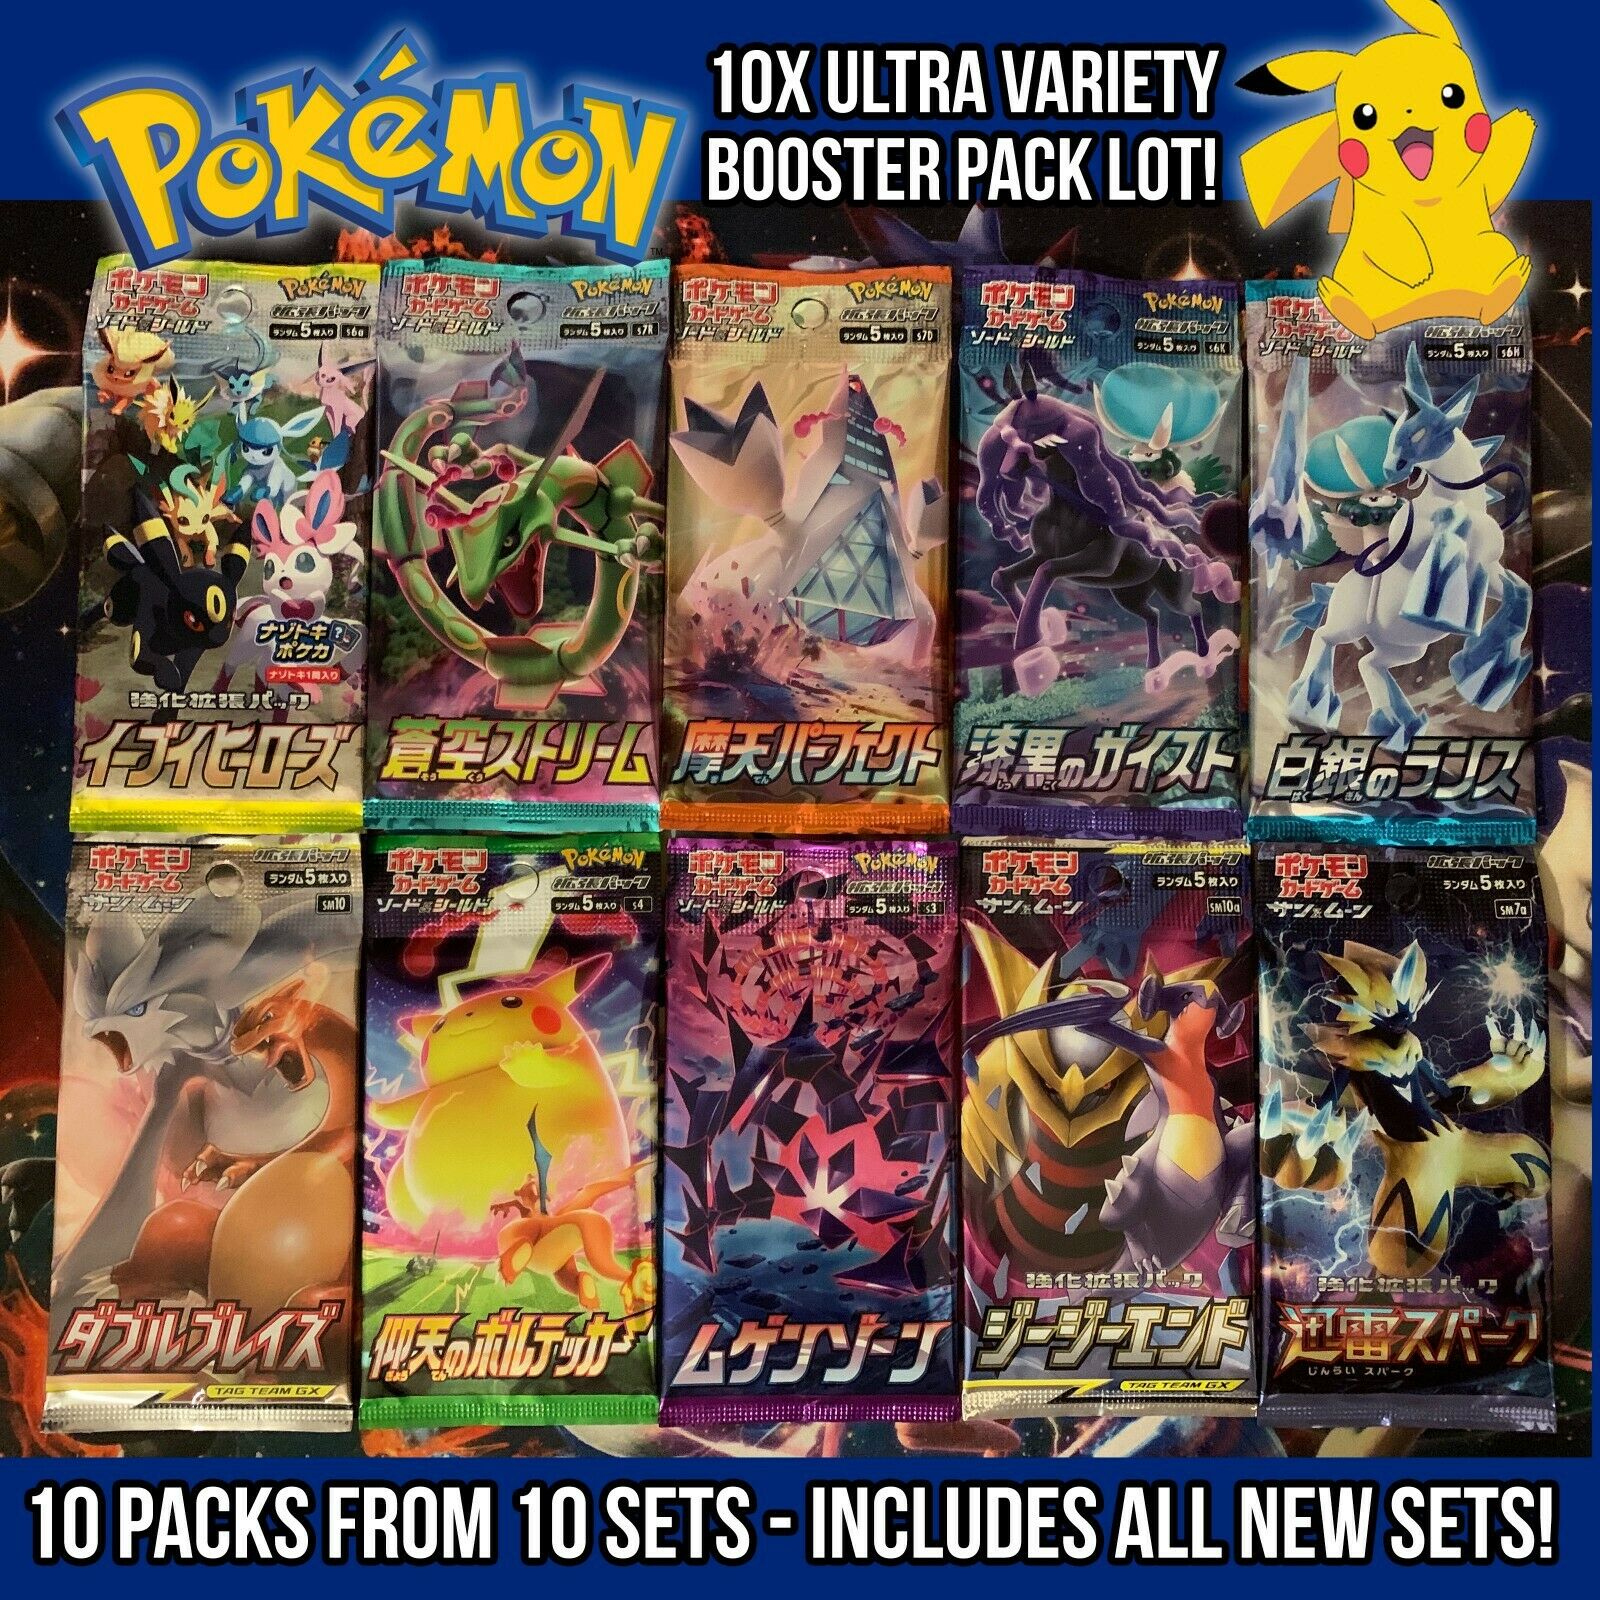 10x Ultra Variety Japanese Pokémon Booster Packs // Includes Evolving Skies